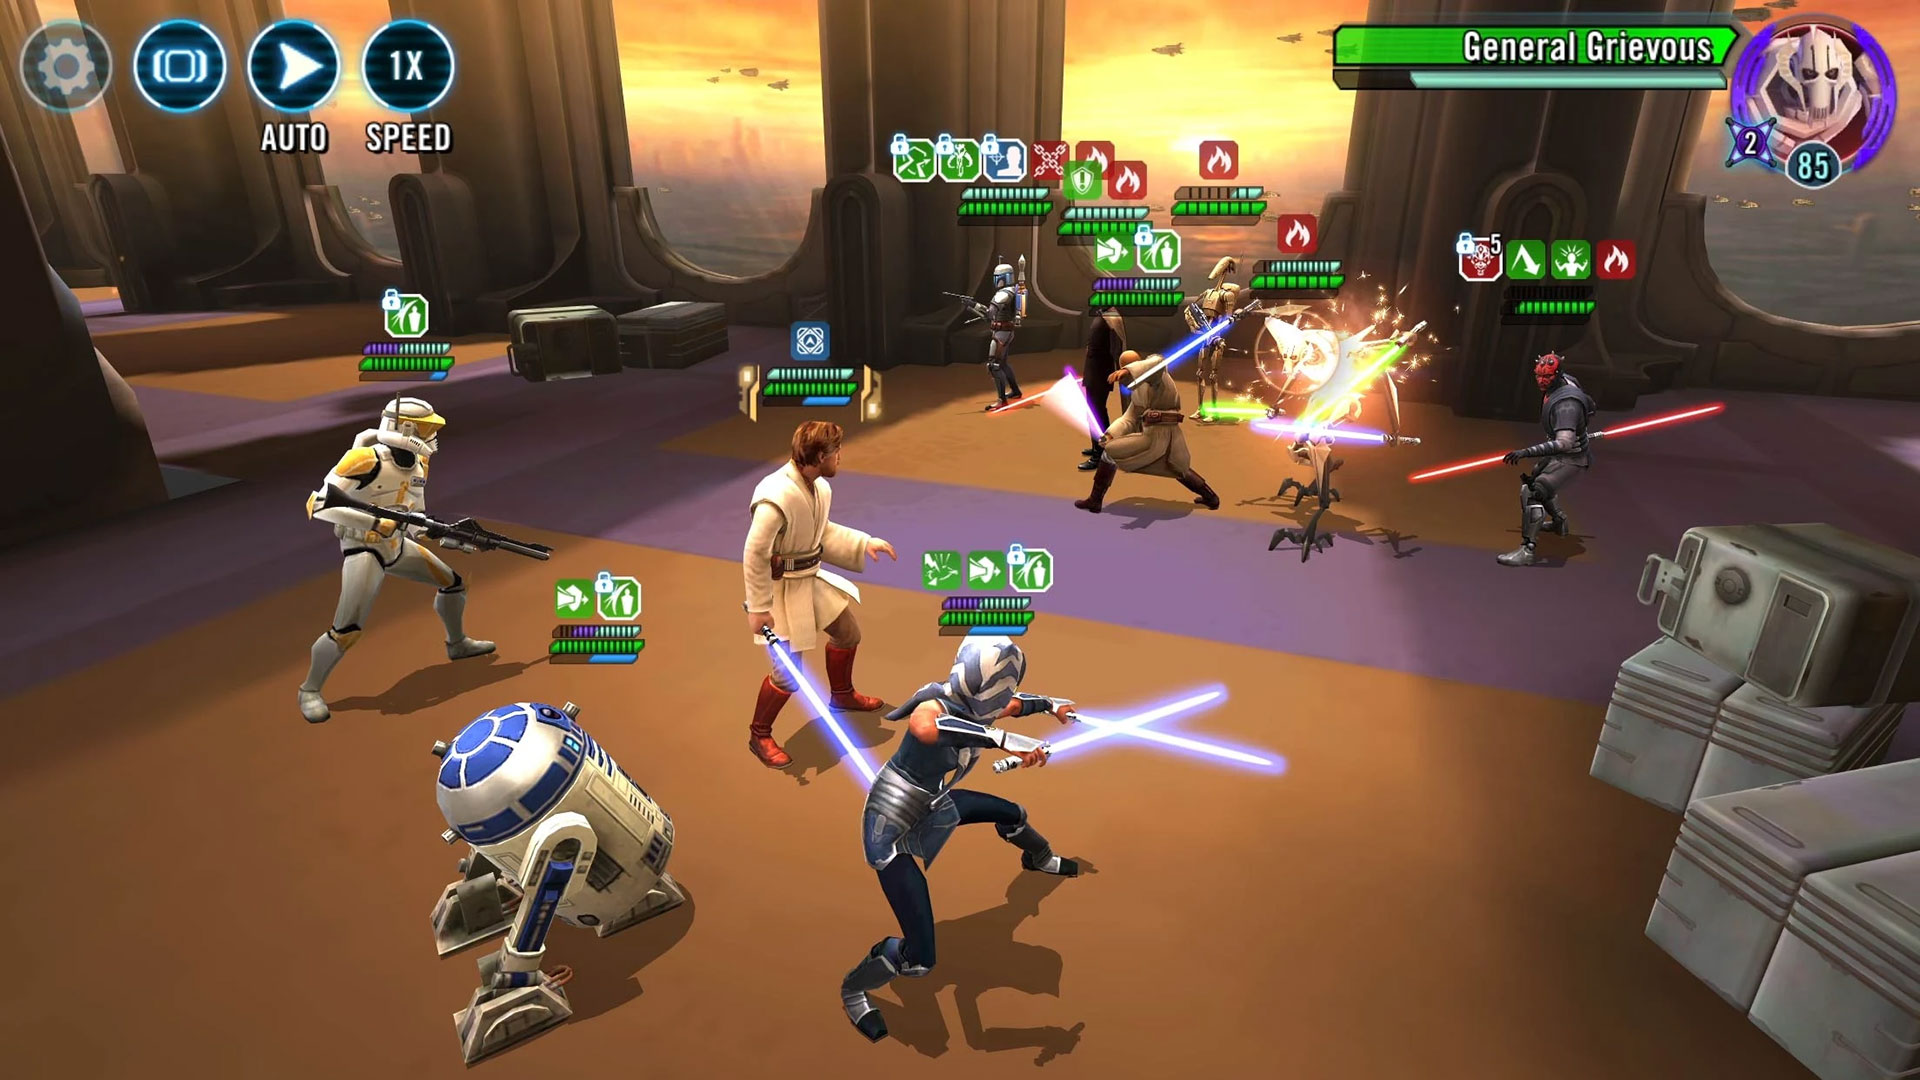 Star Wars: Galaxy of Heroes is launching soon on PC